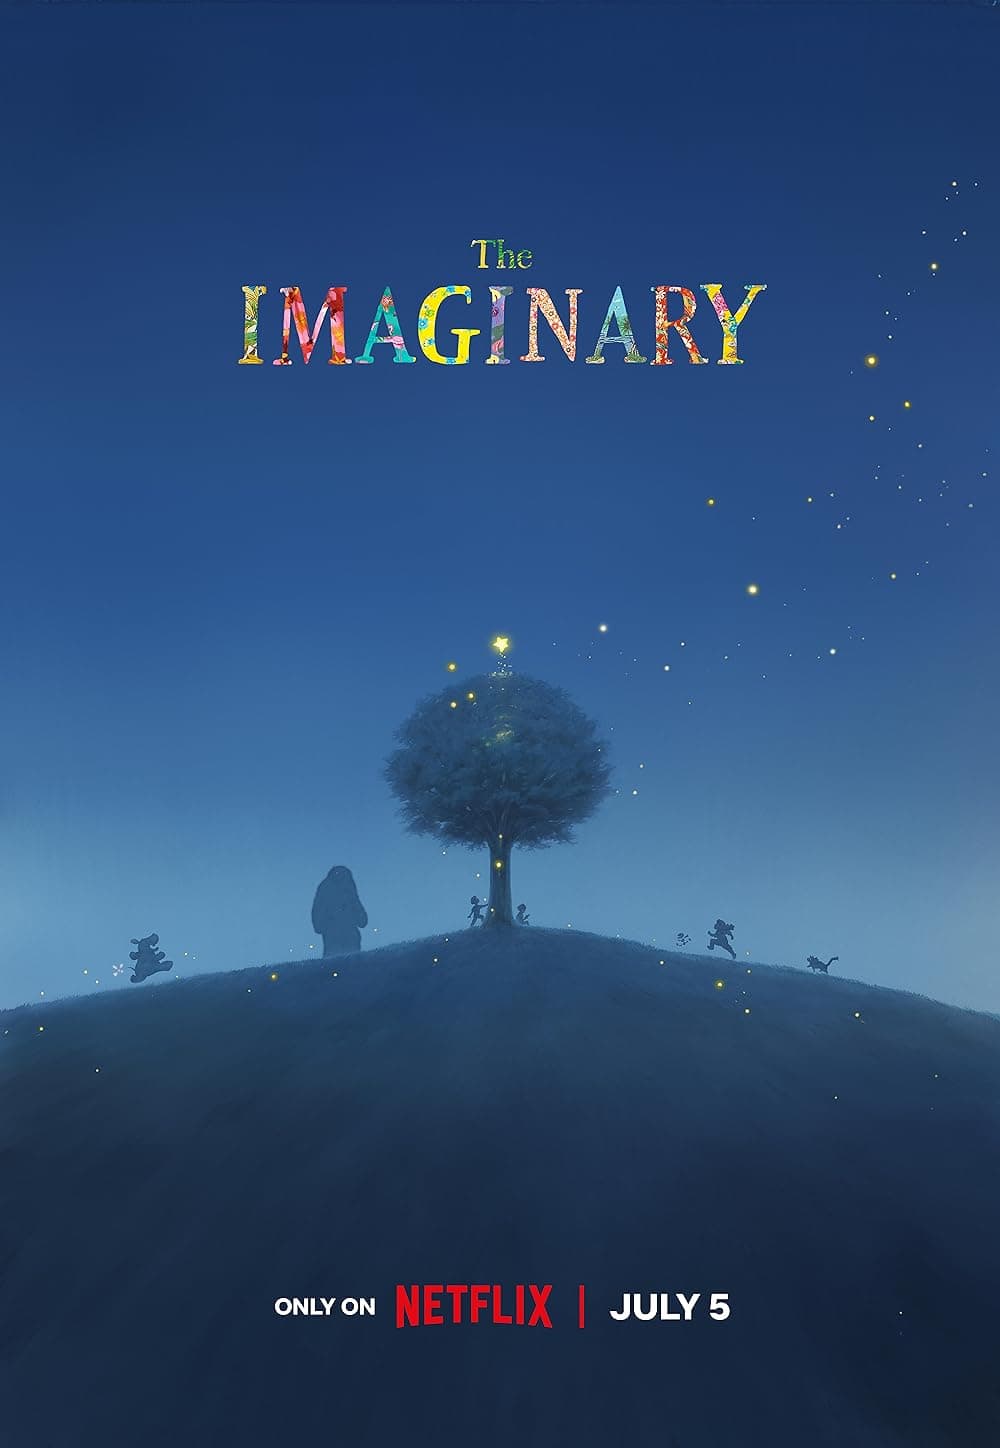 The Imaginary by Studio Ponoc is a Must-Watch for Anime Enthusiasts